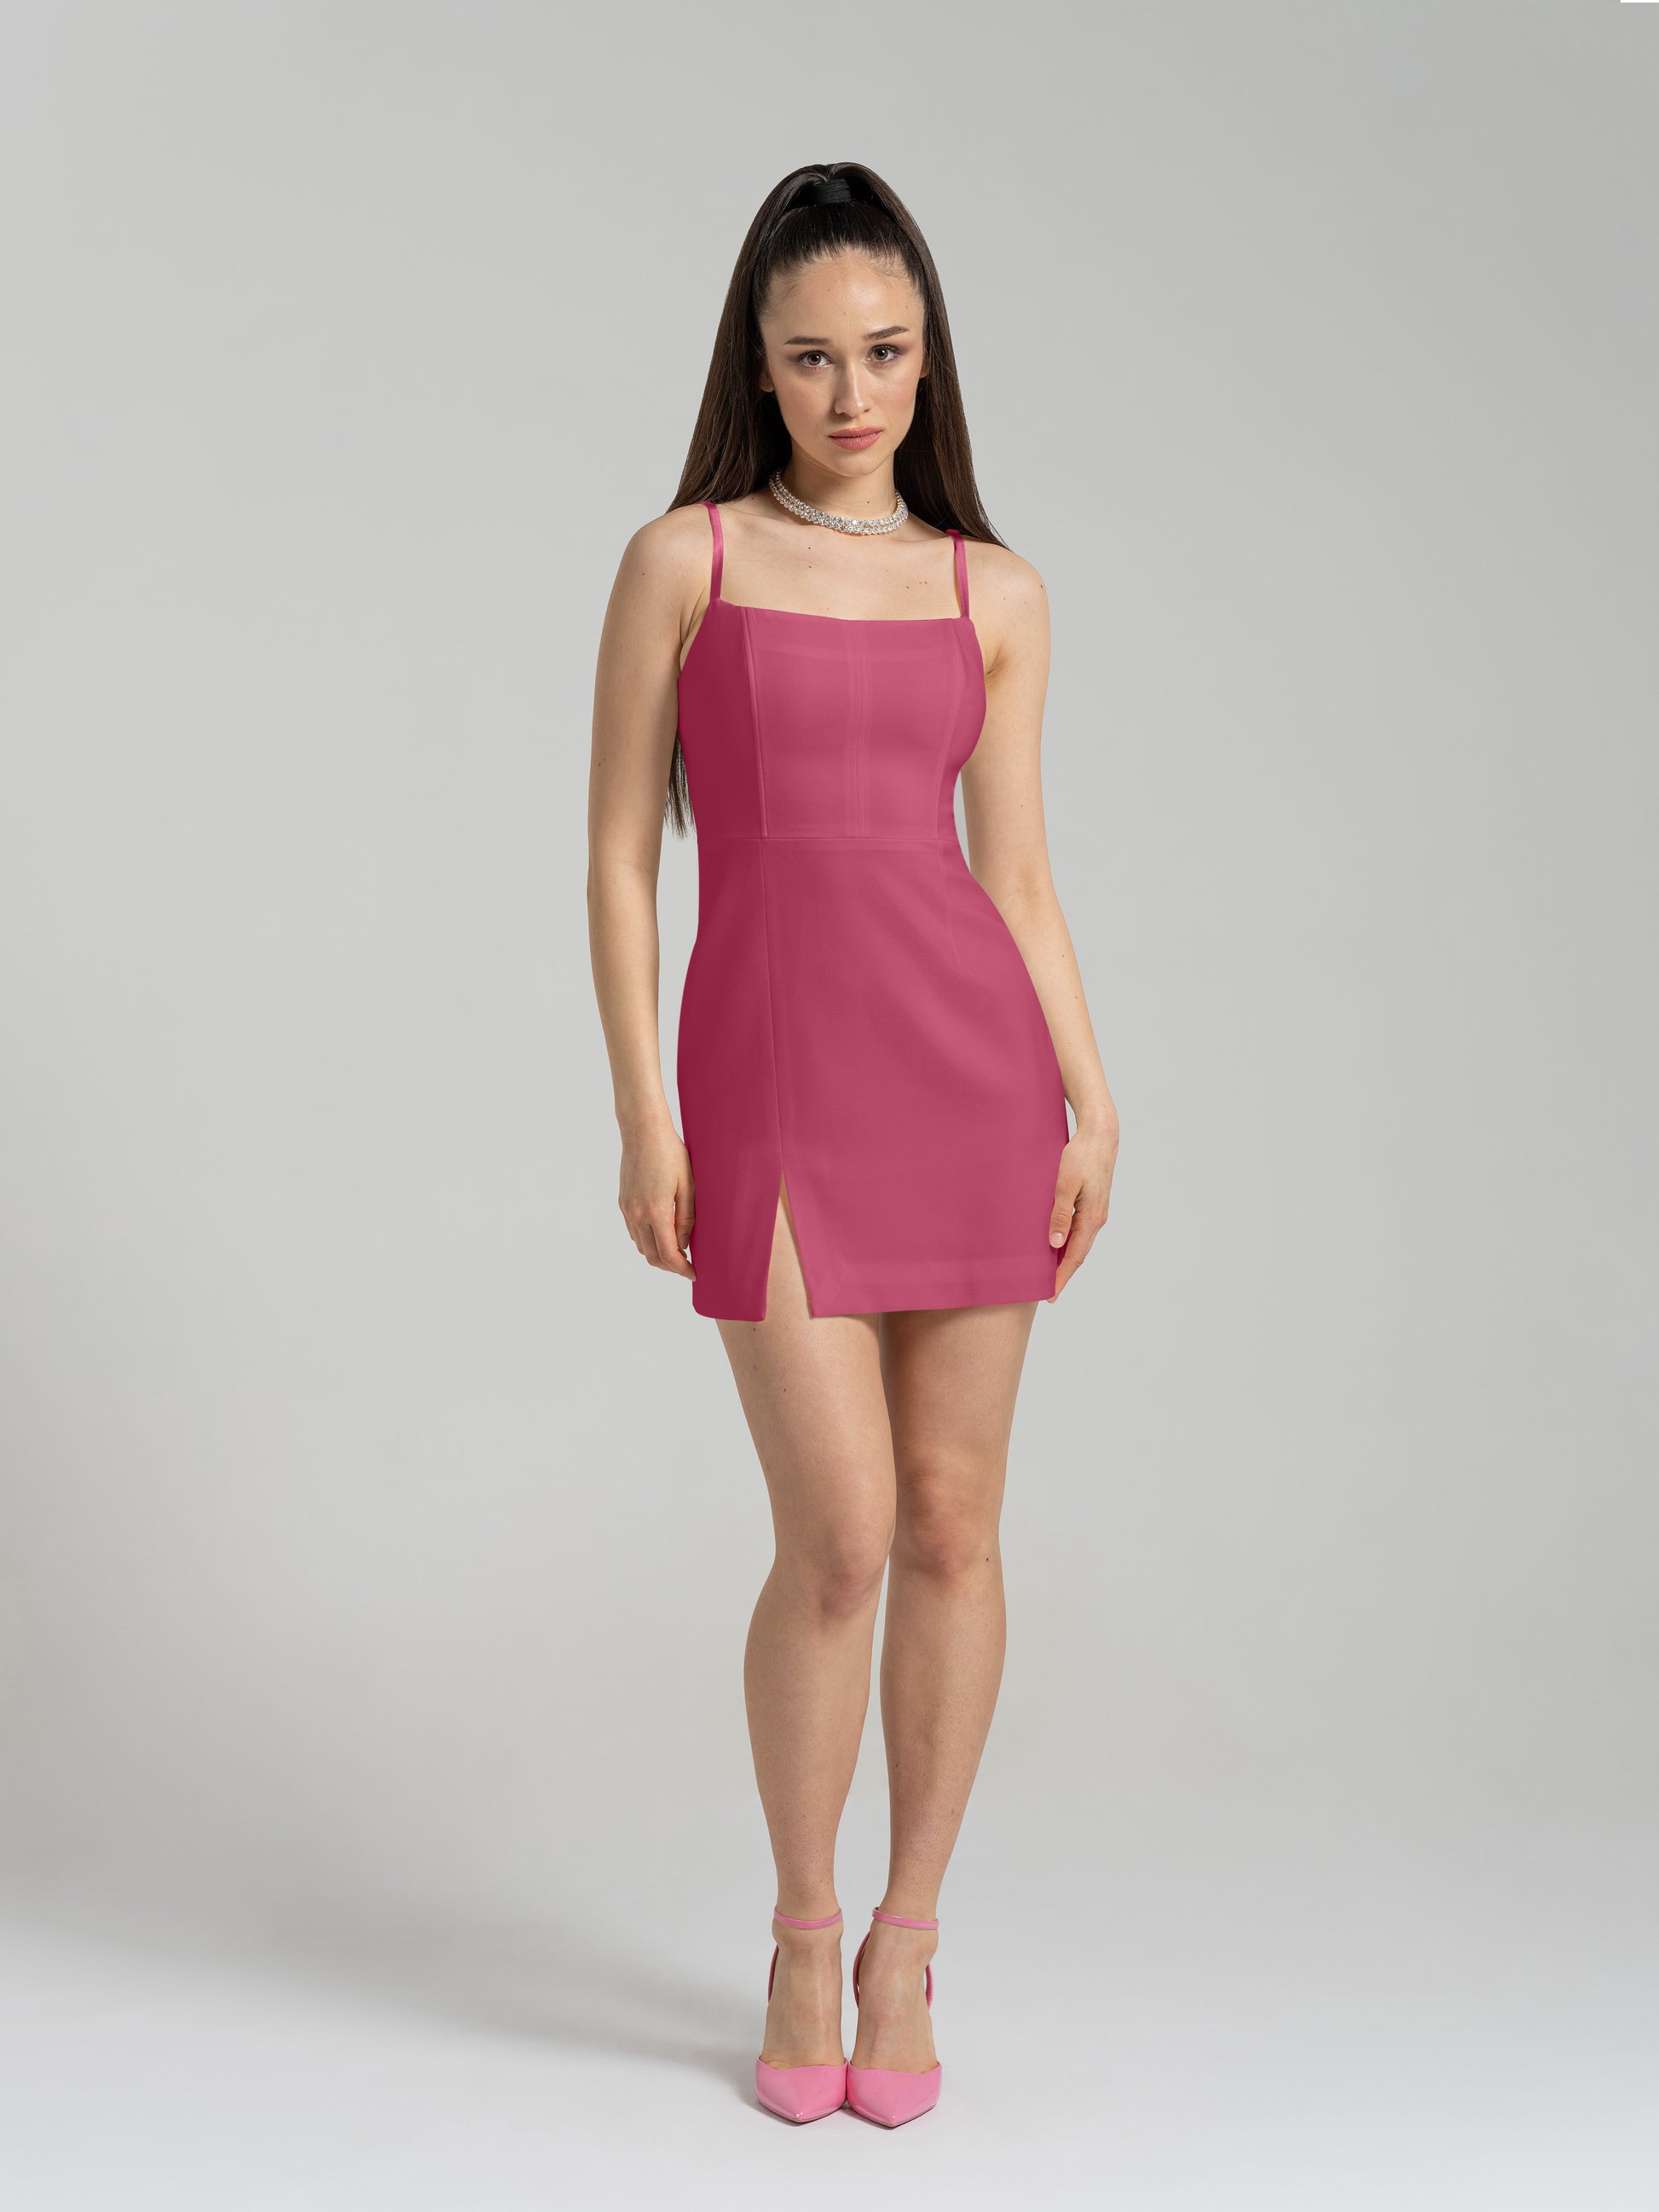 Into You Fitted Mini Dress - Super Pink by Tia Dorraine Women's Luxury Fashion Designer Clothing Brand